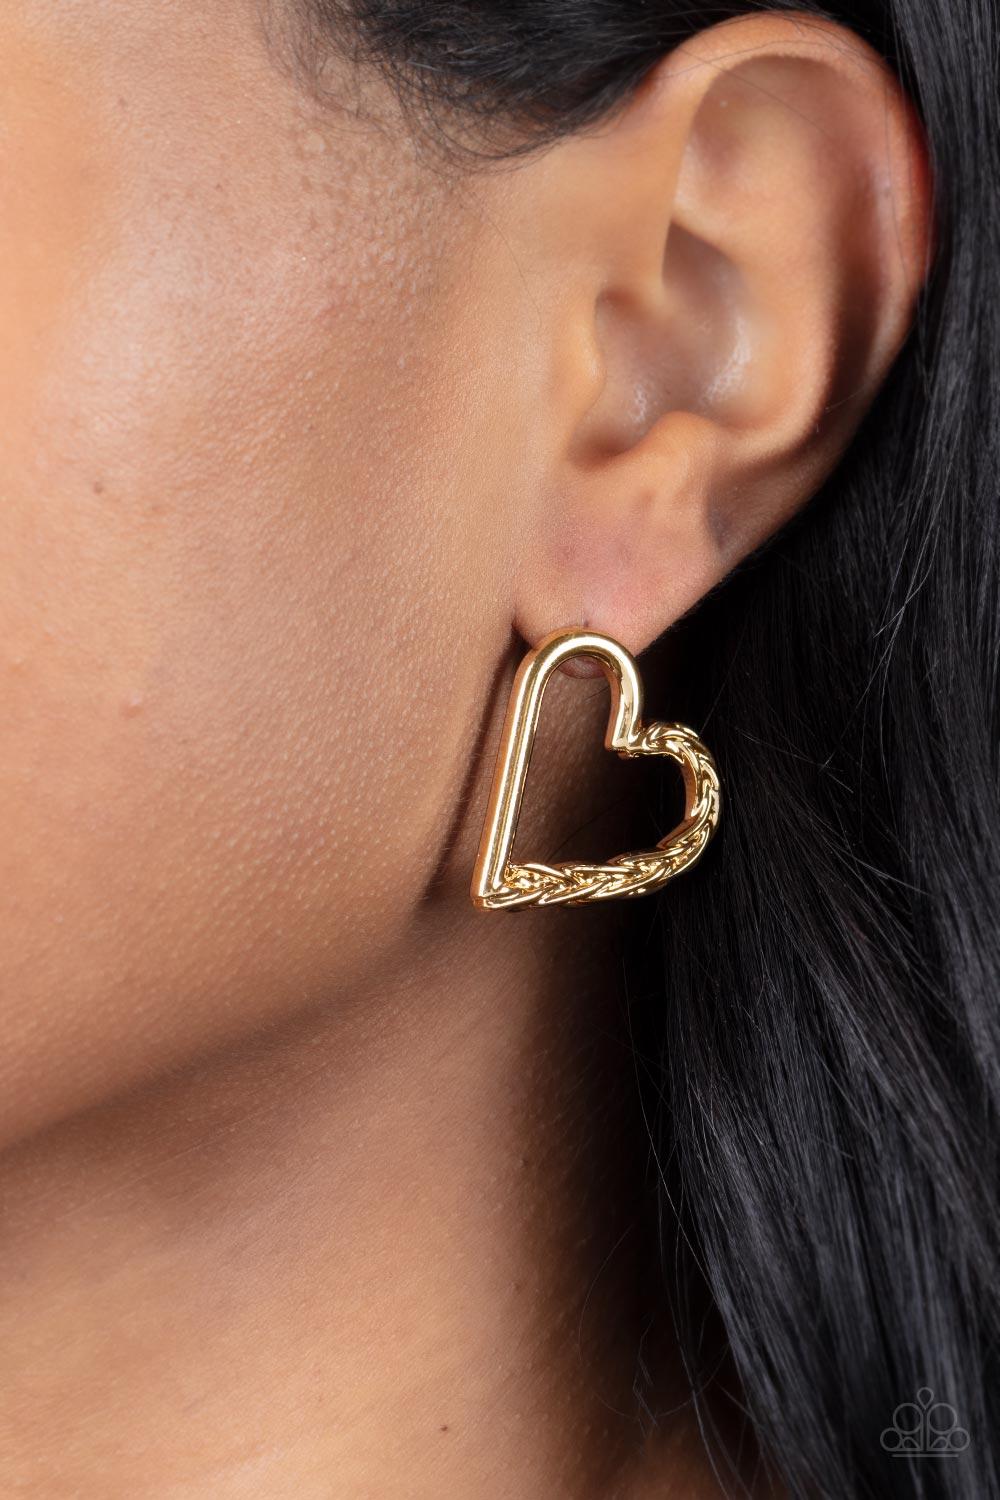 Paparazzi Cupid, Who? Gold Post Earrings - P5PO-GDXX-185XX